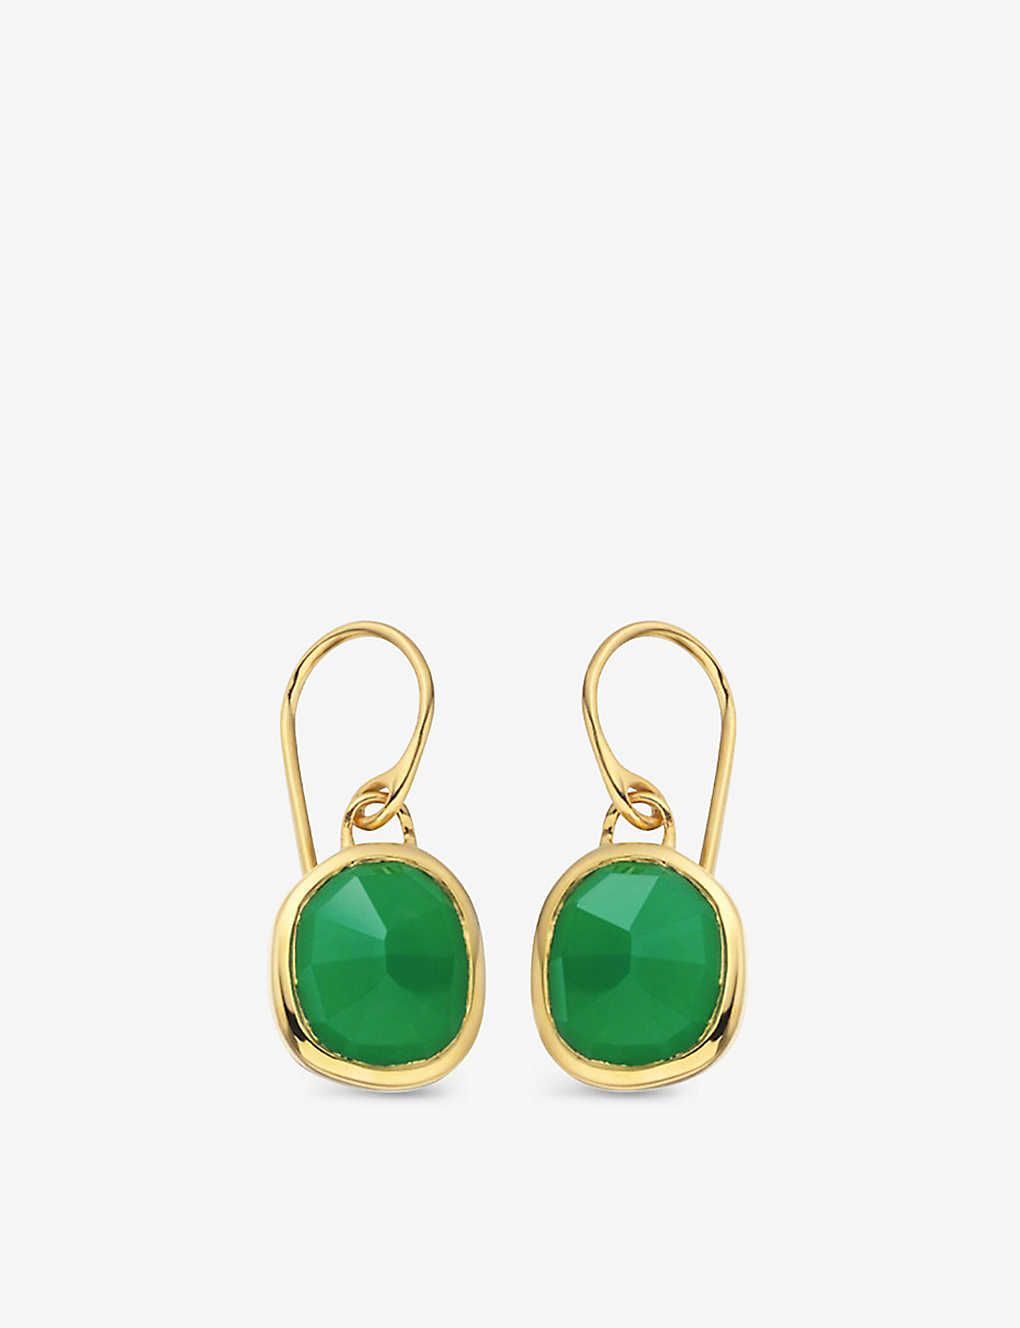 Siren 18ct gold-plated wire earrings with green onyx | Selfridges